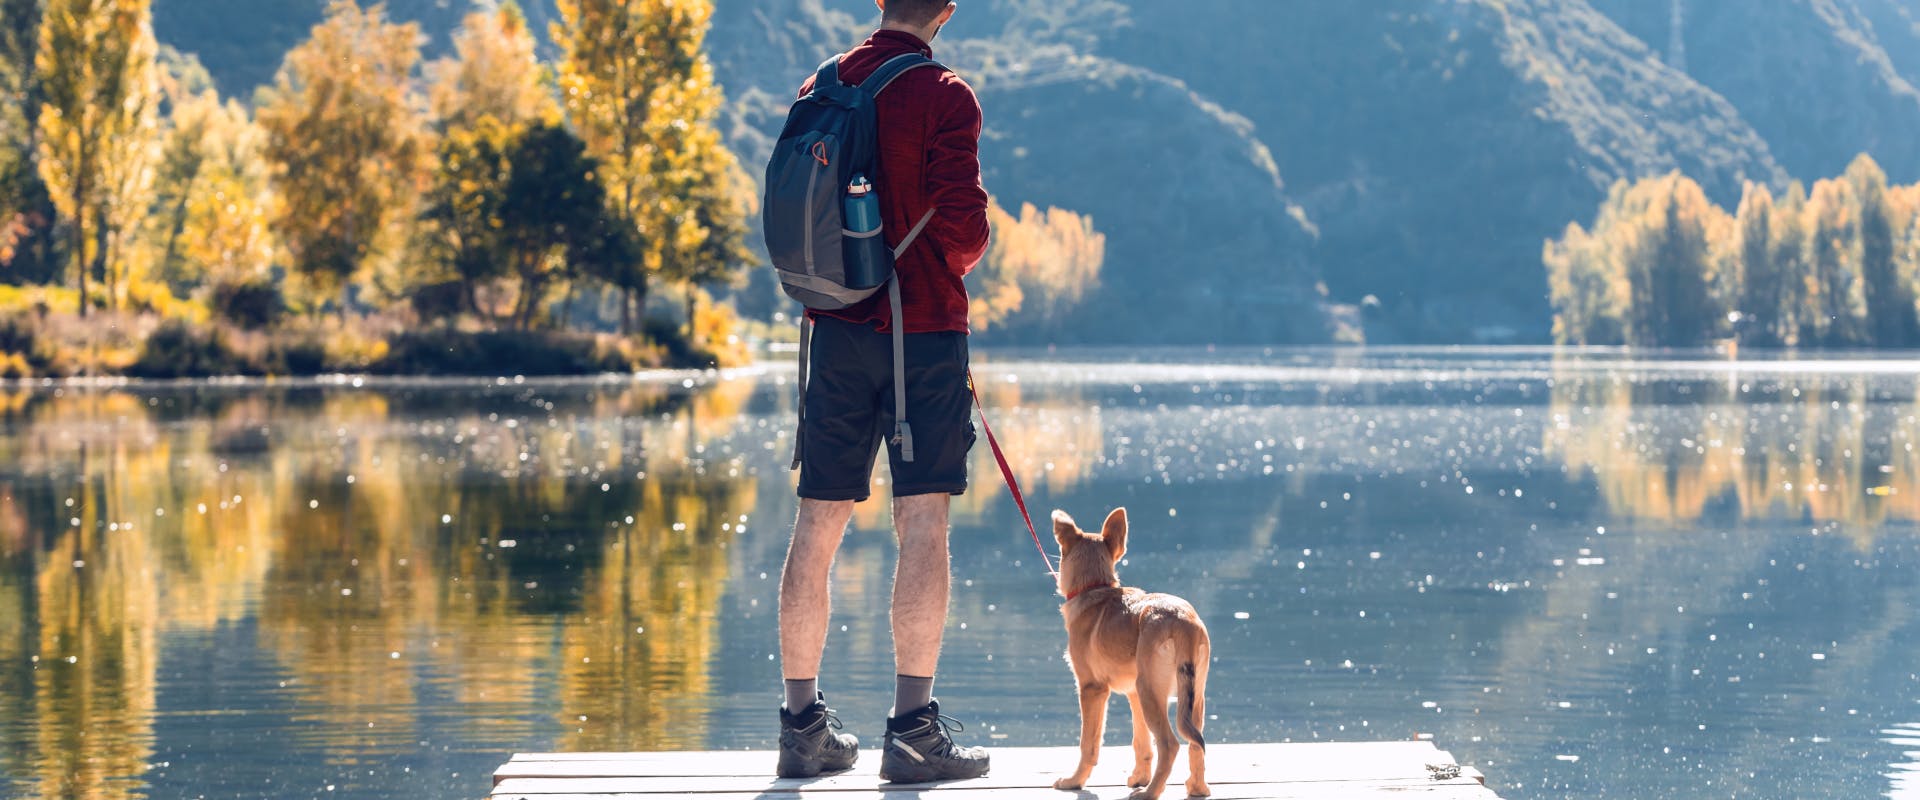 dog and man stood on a lake jetty facing mountains